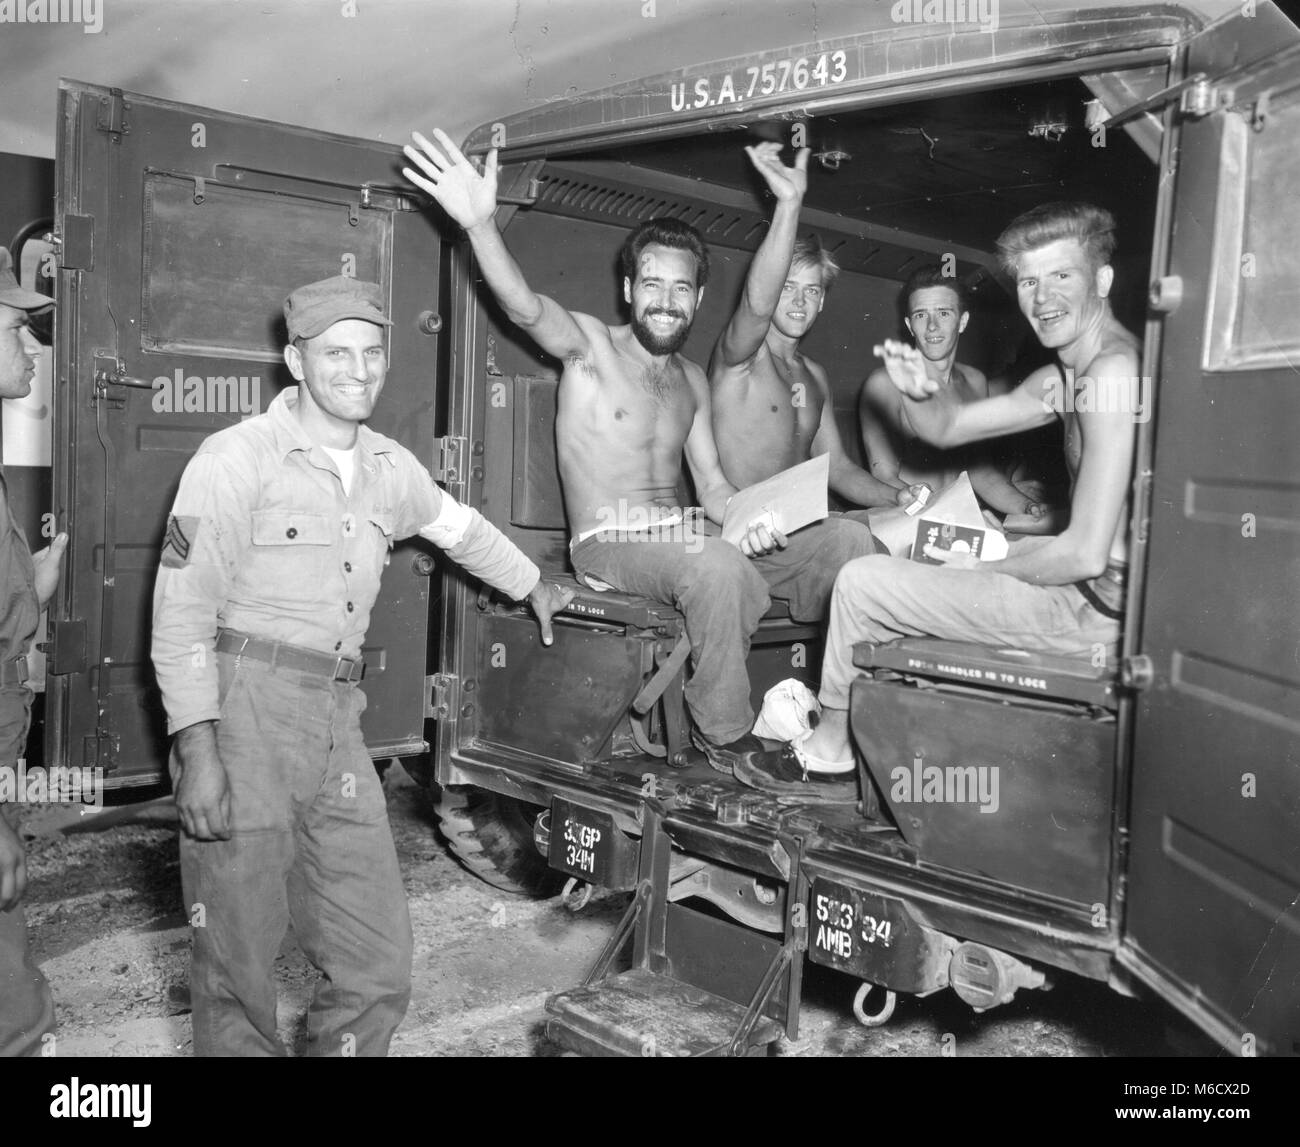 Jubilant, repatriated American prisoners of war wave happily as they await their departure by ambulance to a processing center on the first leg of their journey home. Panmunjom, Korea, Sept 4. 1953. U.S. Army Stock Photo